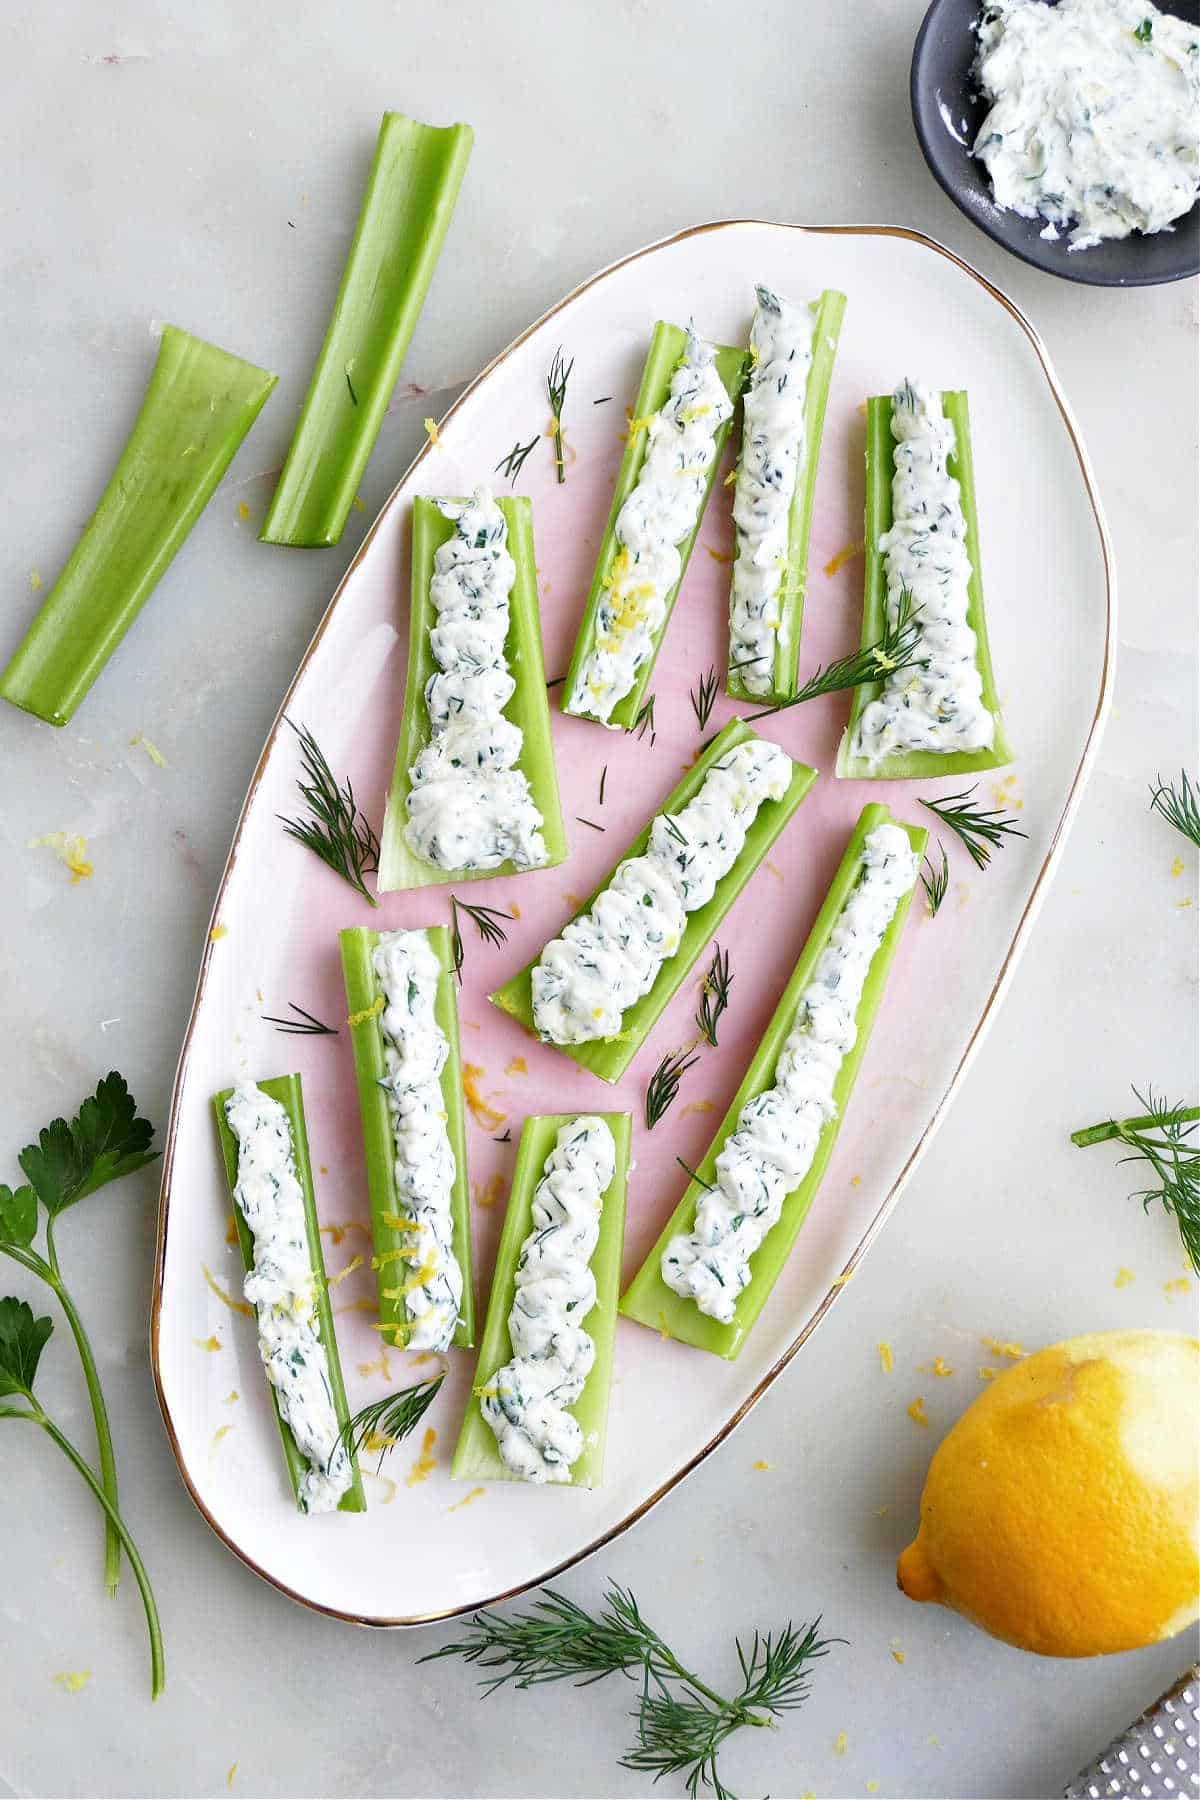 celery sticks stuffed with creamy cheese and herbs on a tray on a counter